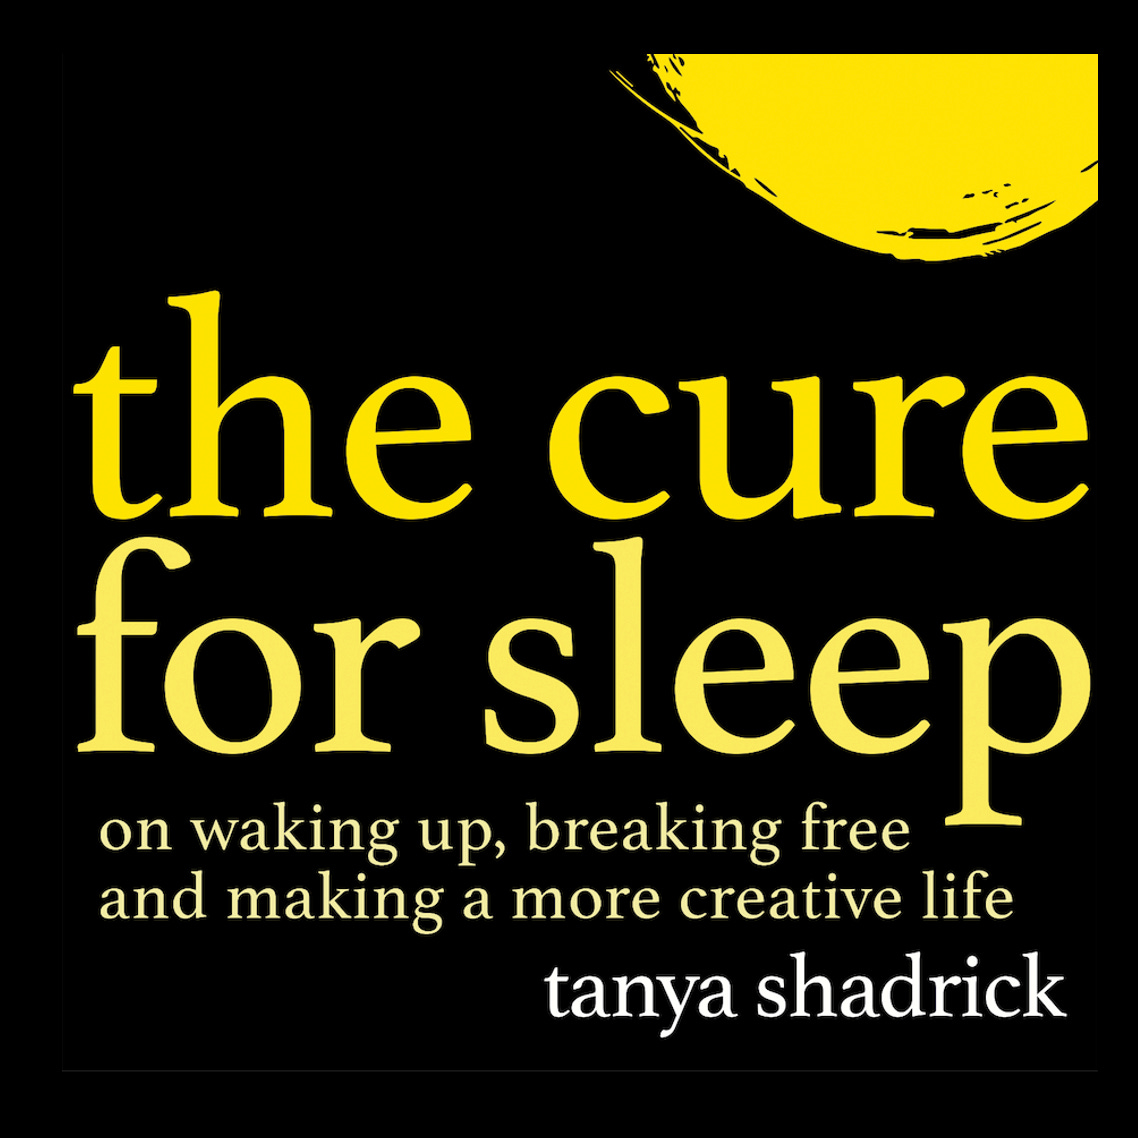 The Cure for Sleep with Tanya Shadrick